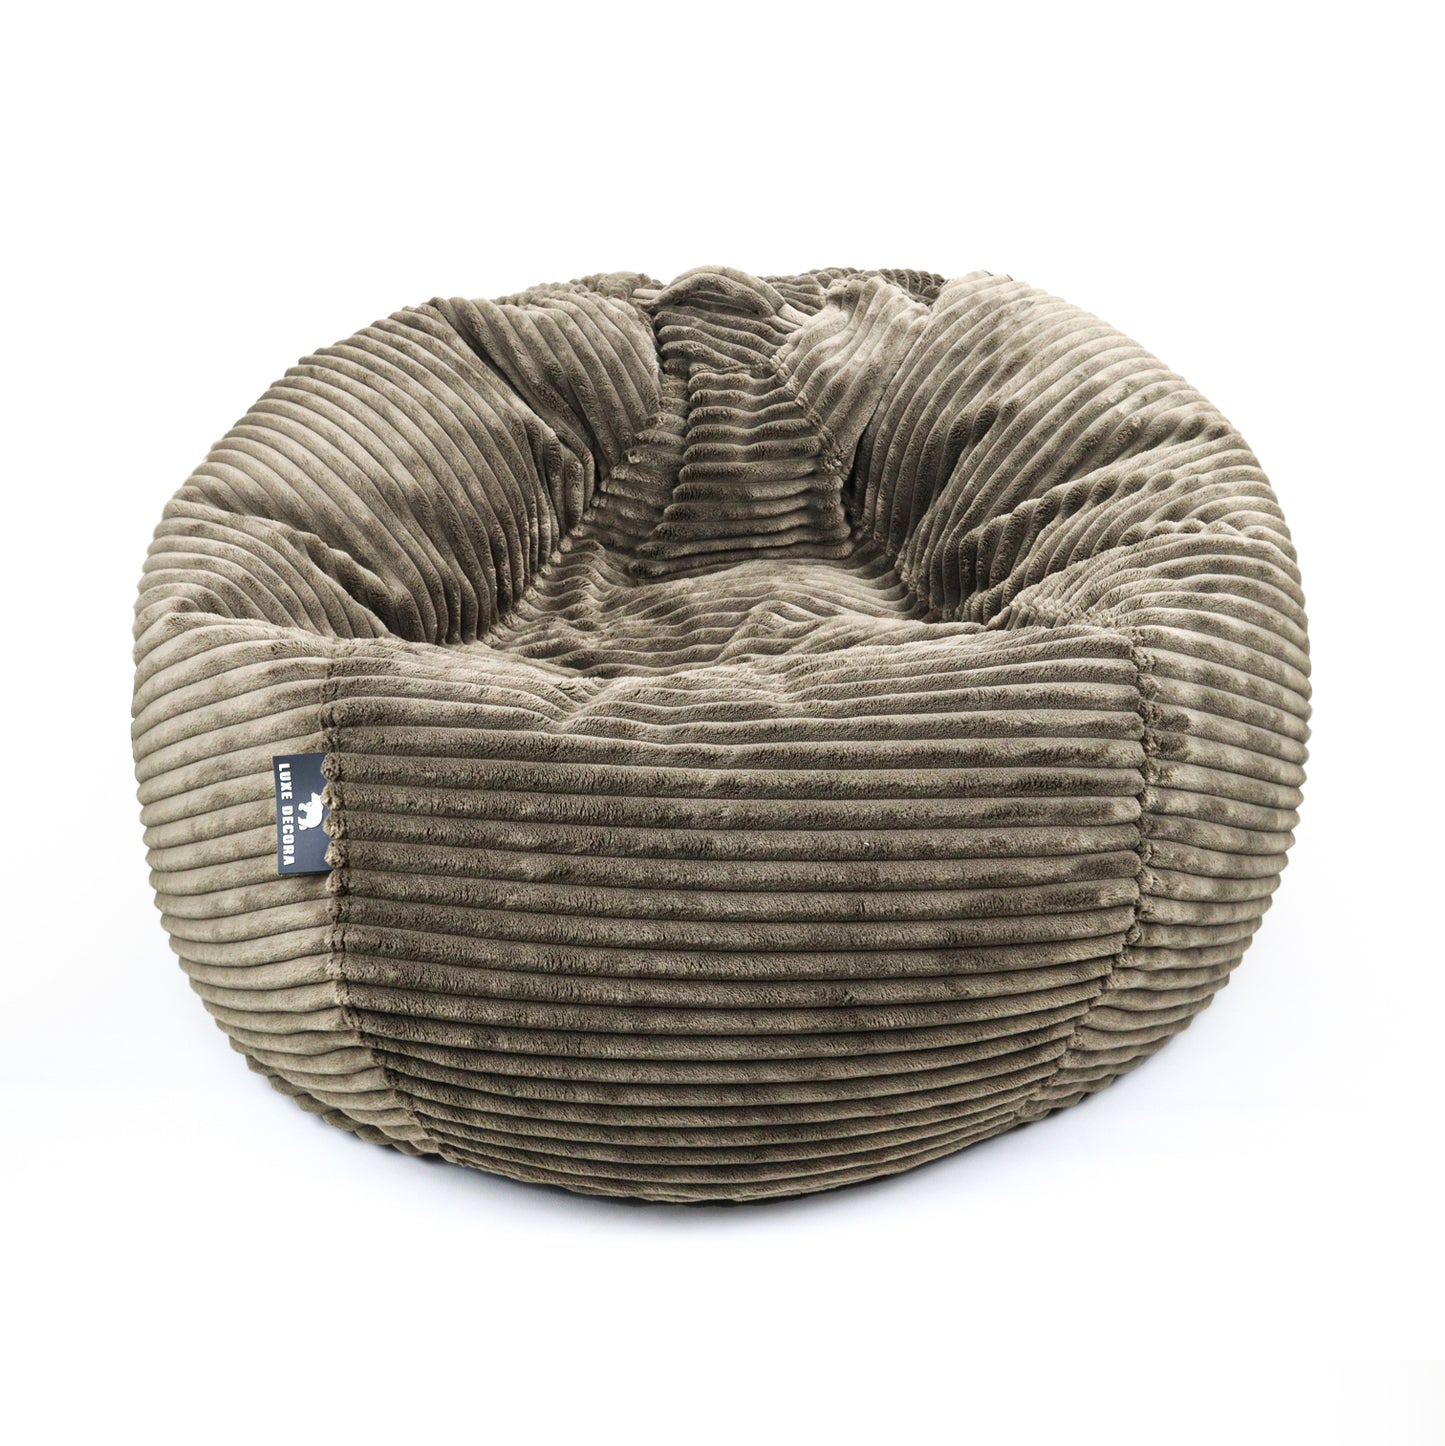 Solco - Channel Fur Bean Bag for Contemporary Comfort